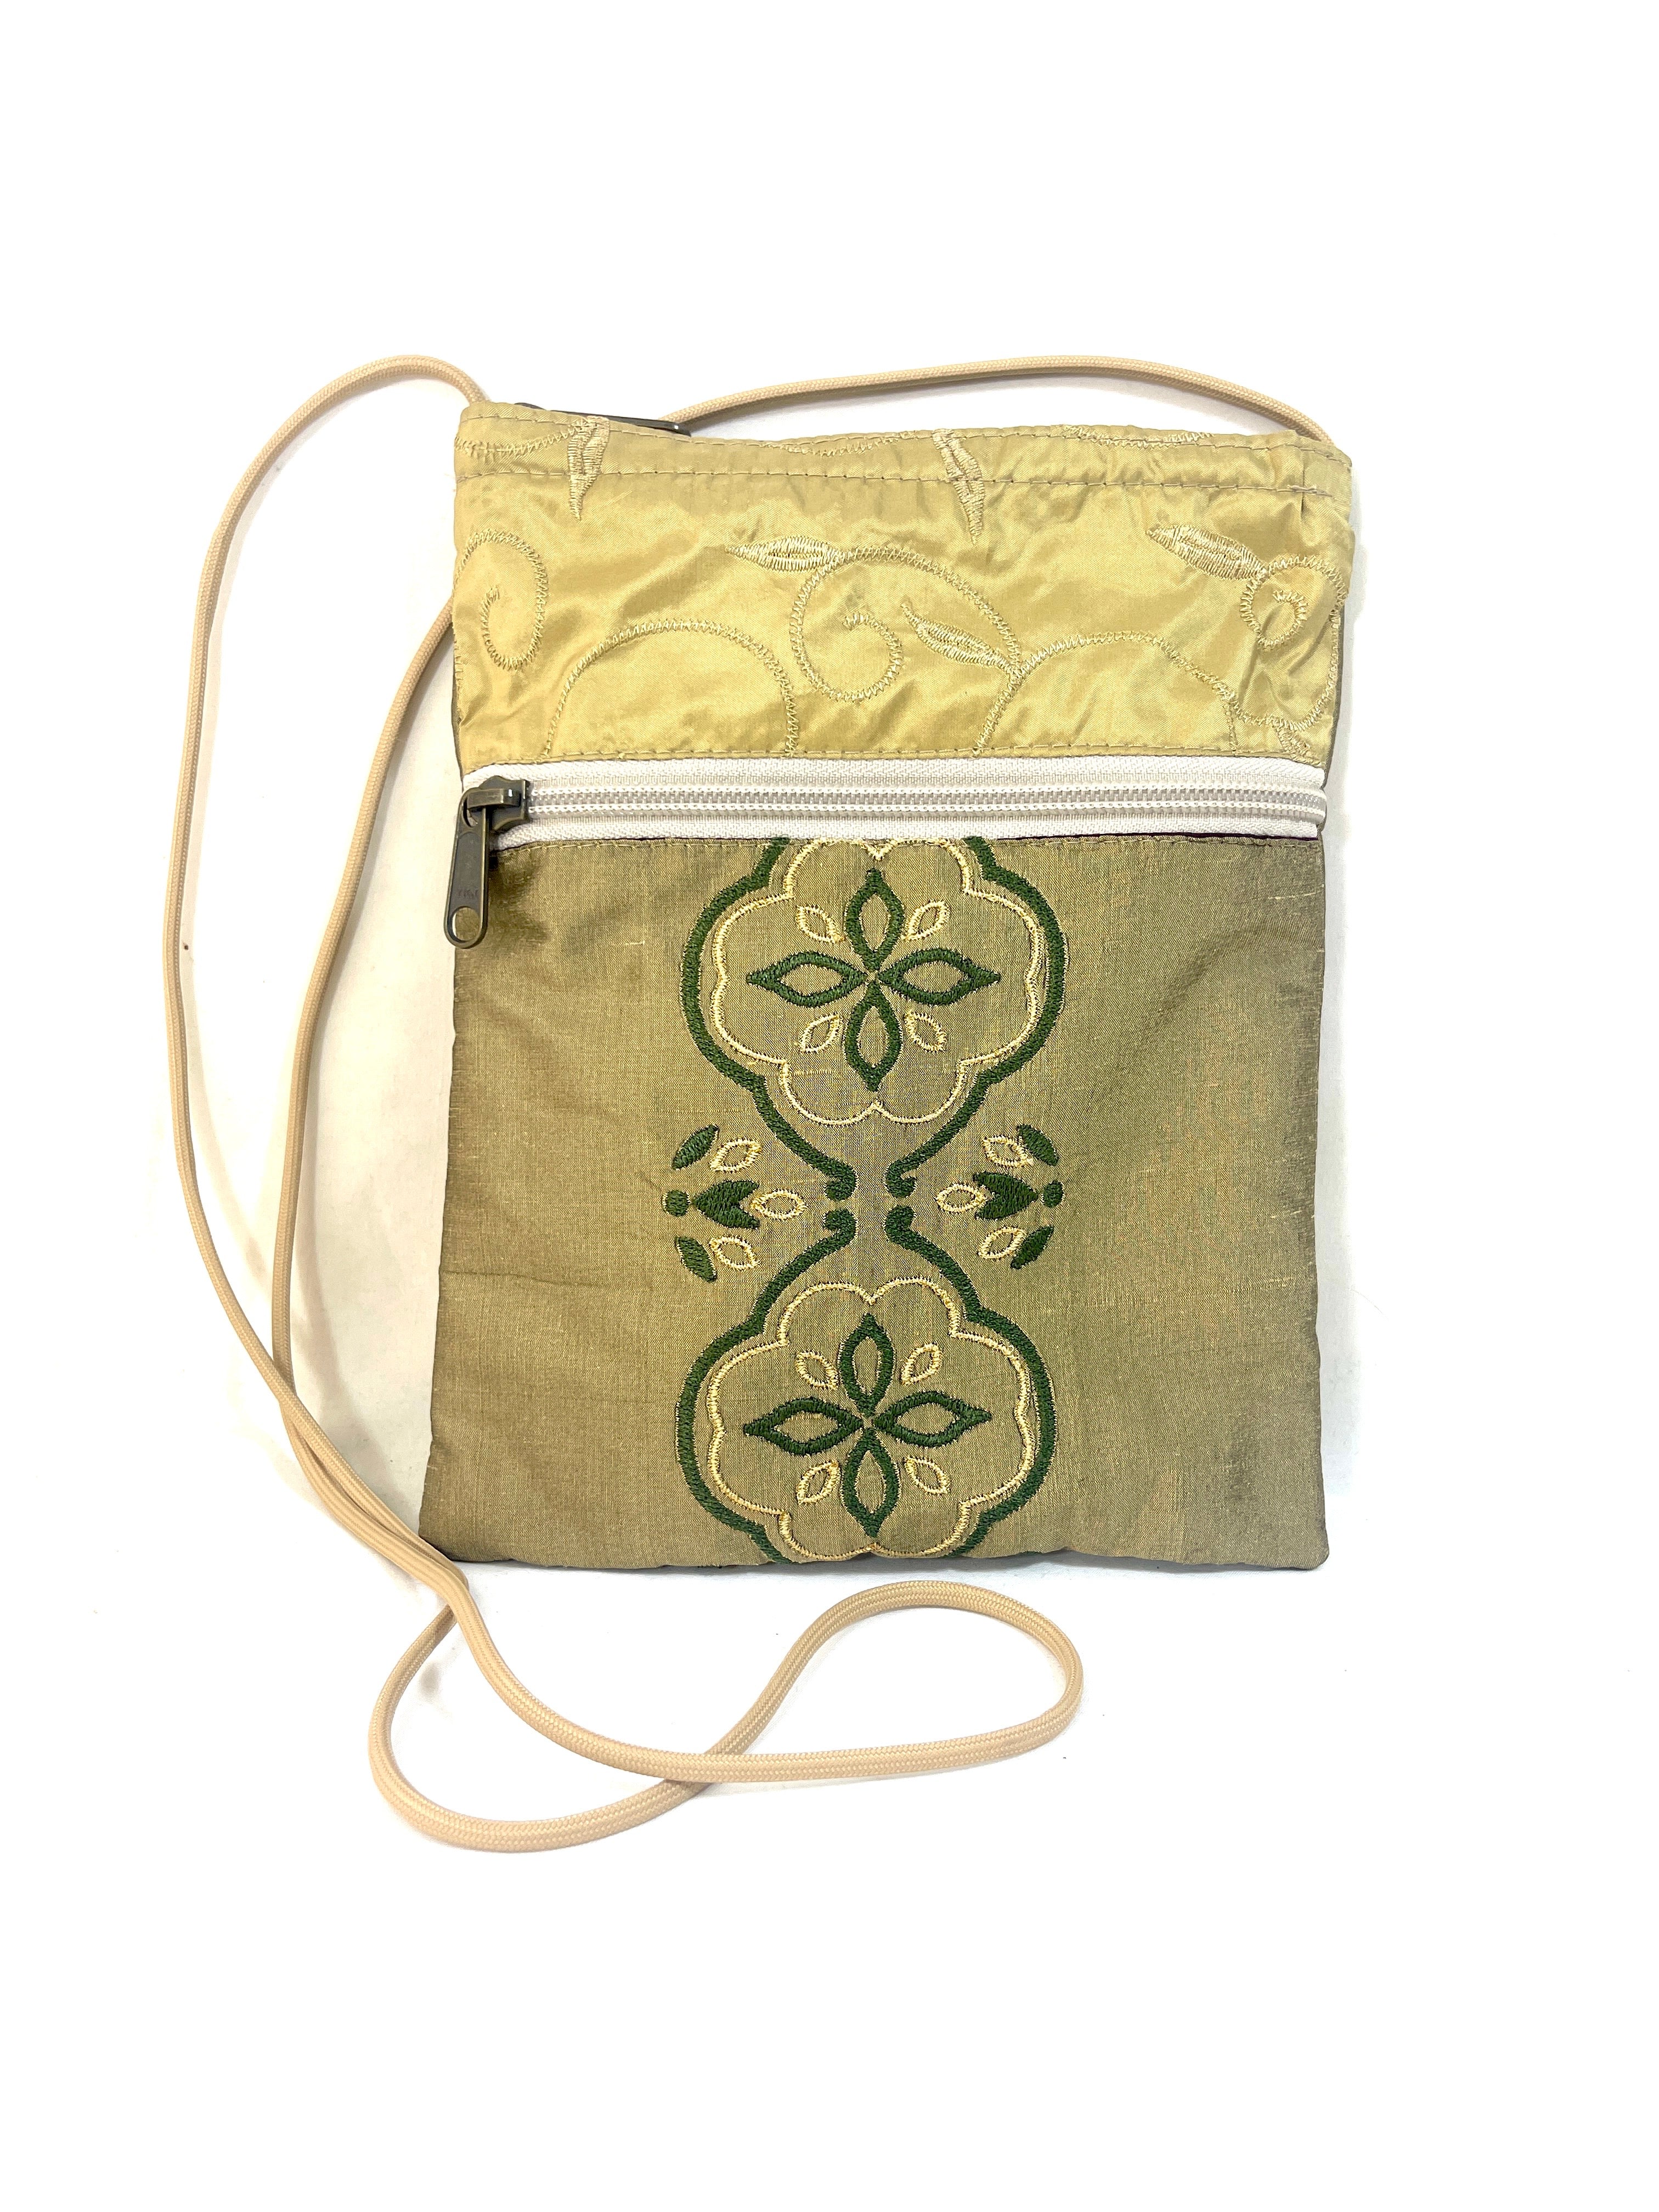 Patch Purse in Coordinating Embroidered Silks